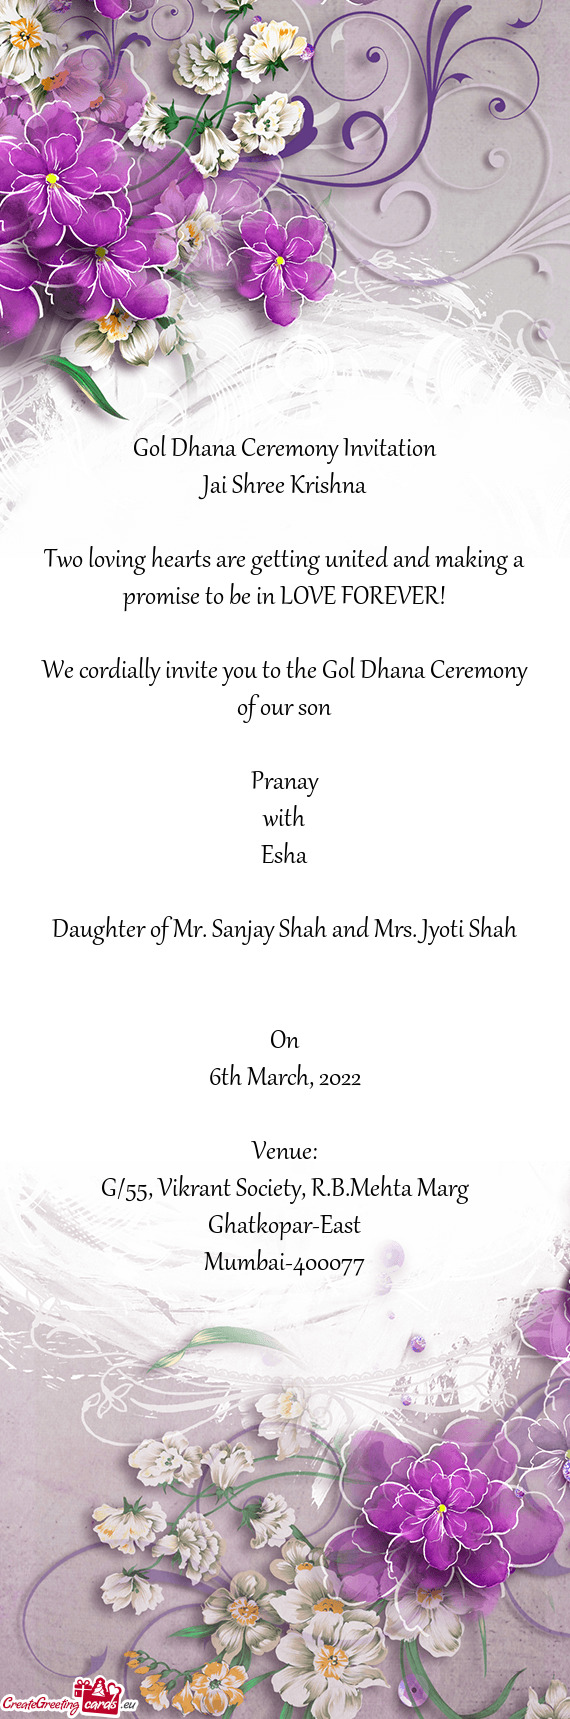 We cordially invite you to the Gol Dhana Ceremony of our son